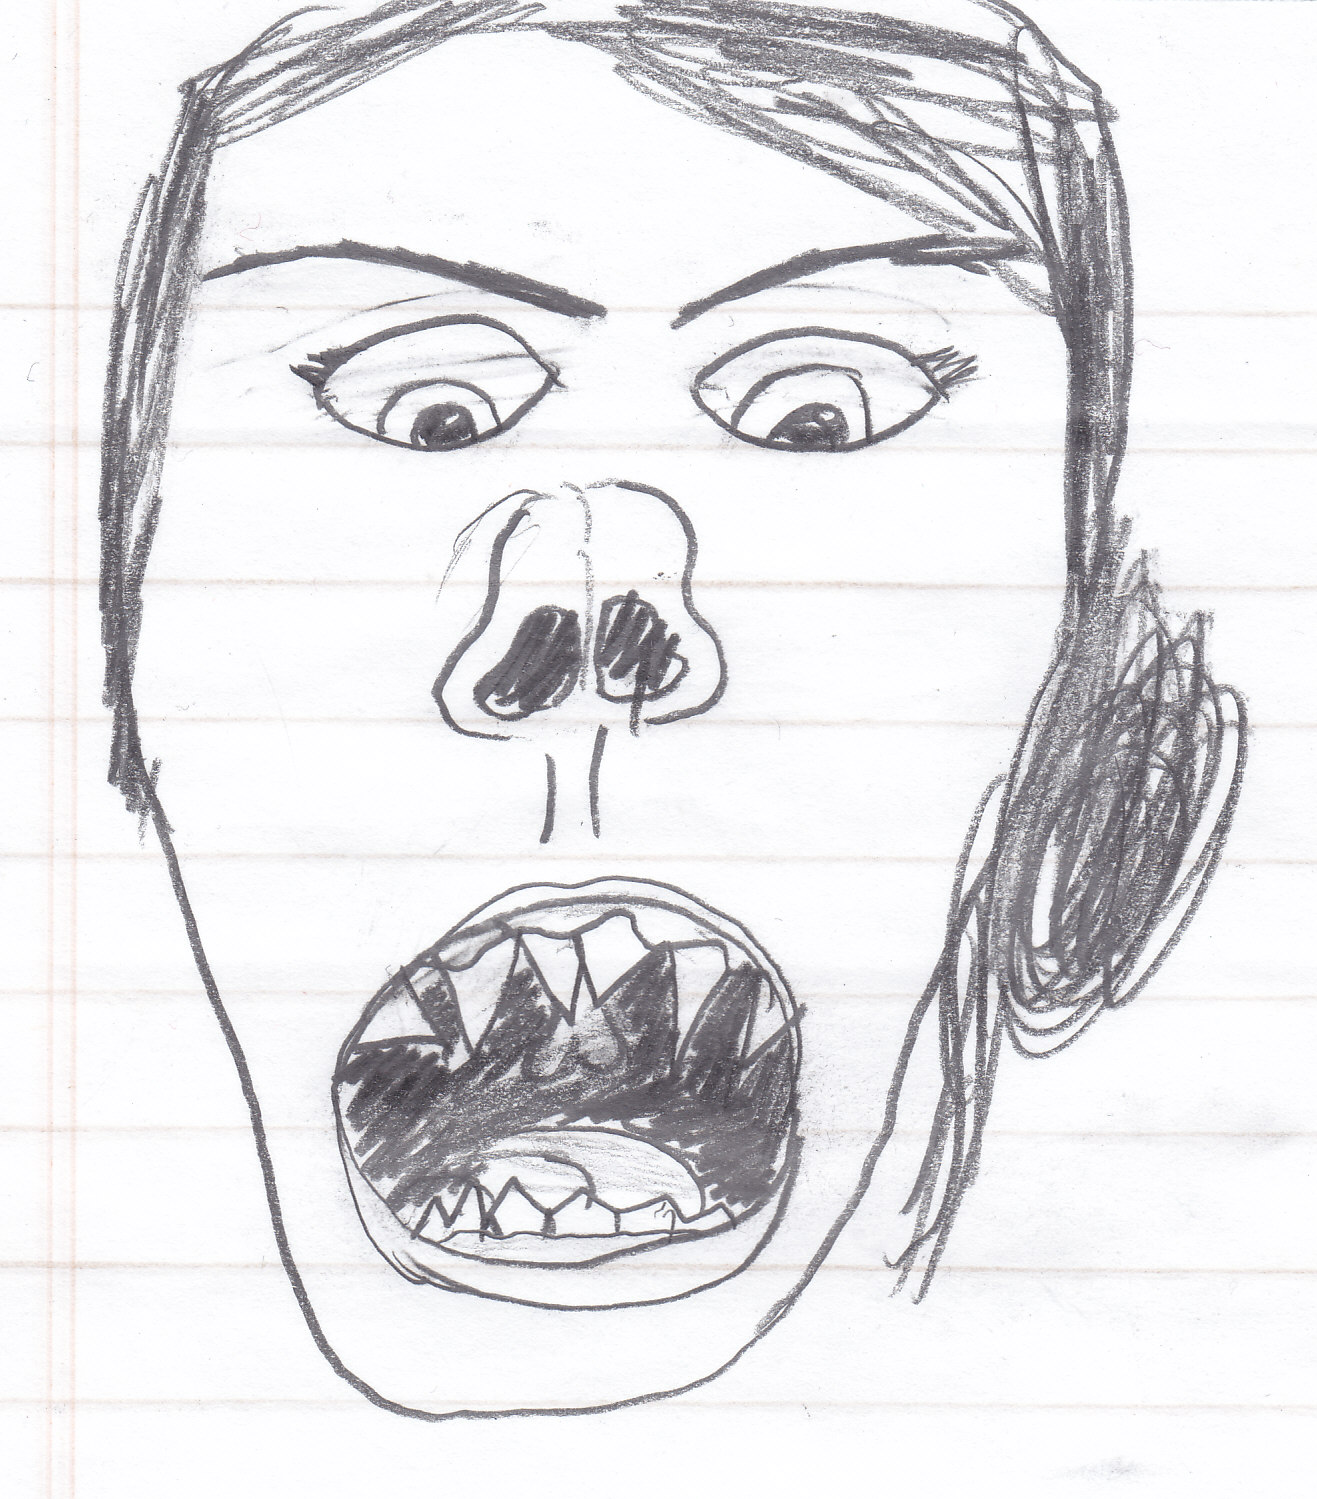 a very monster looking drawing of me, with pointy teeth and a pig-like nose, glaring down